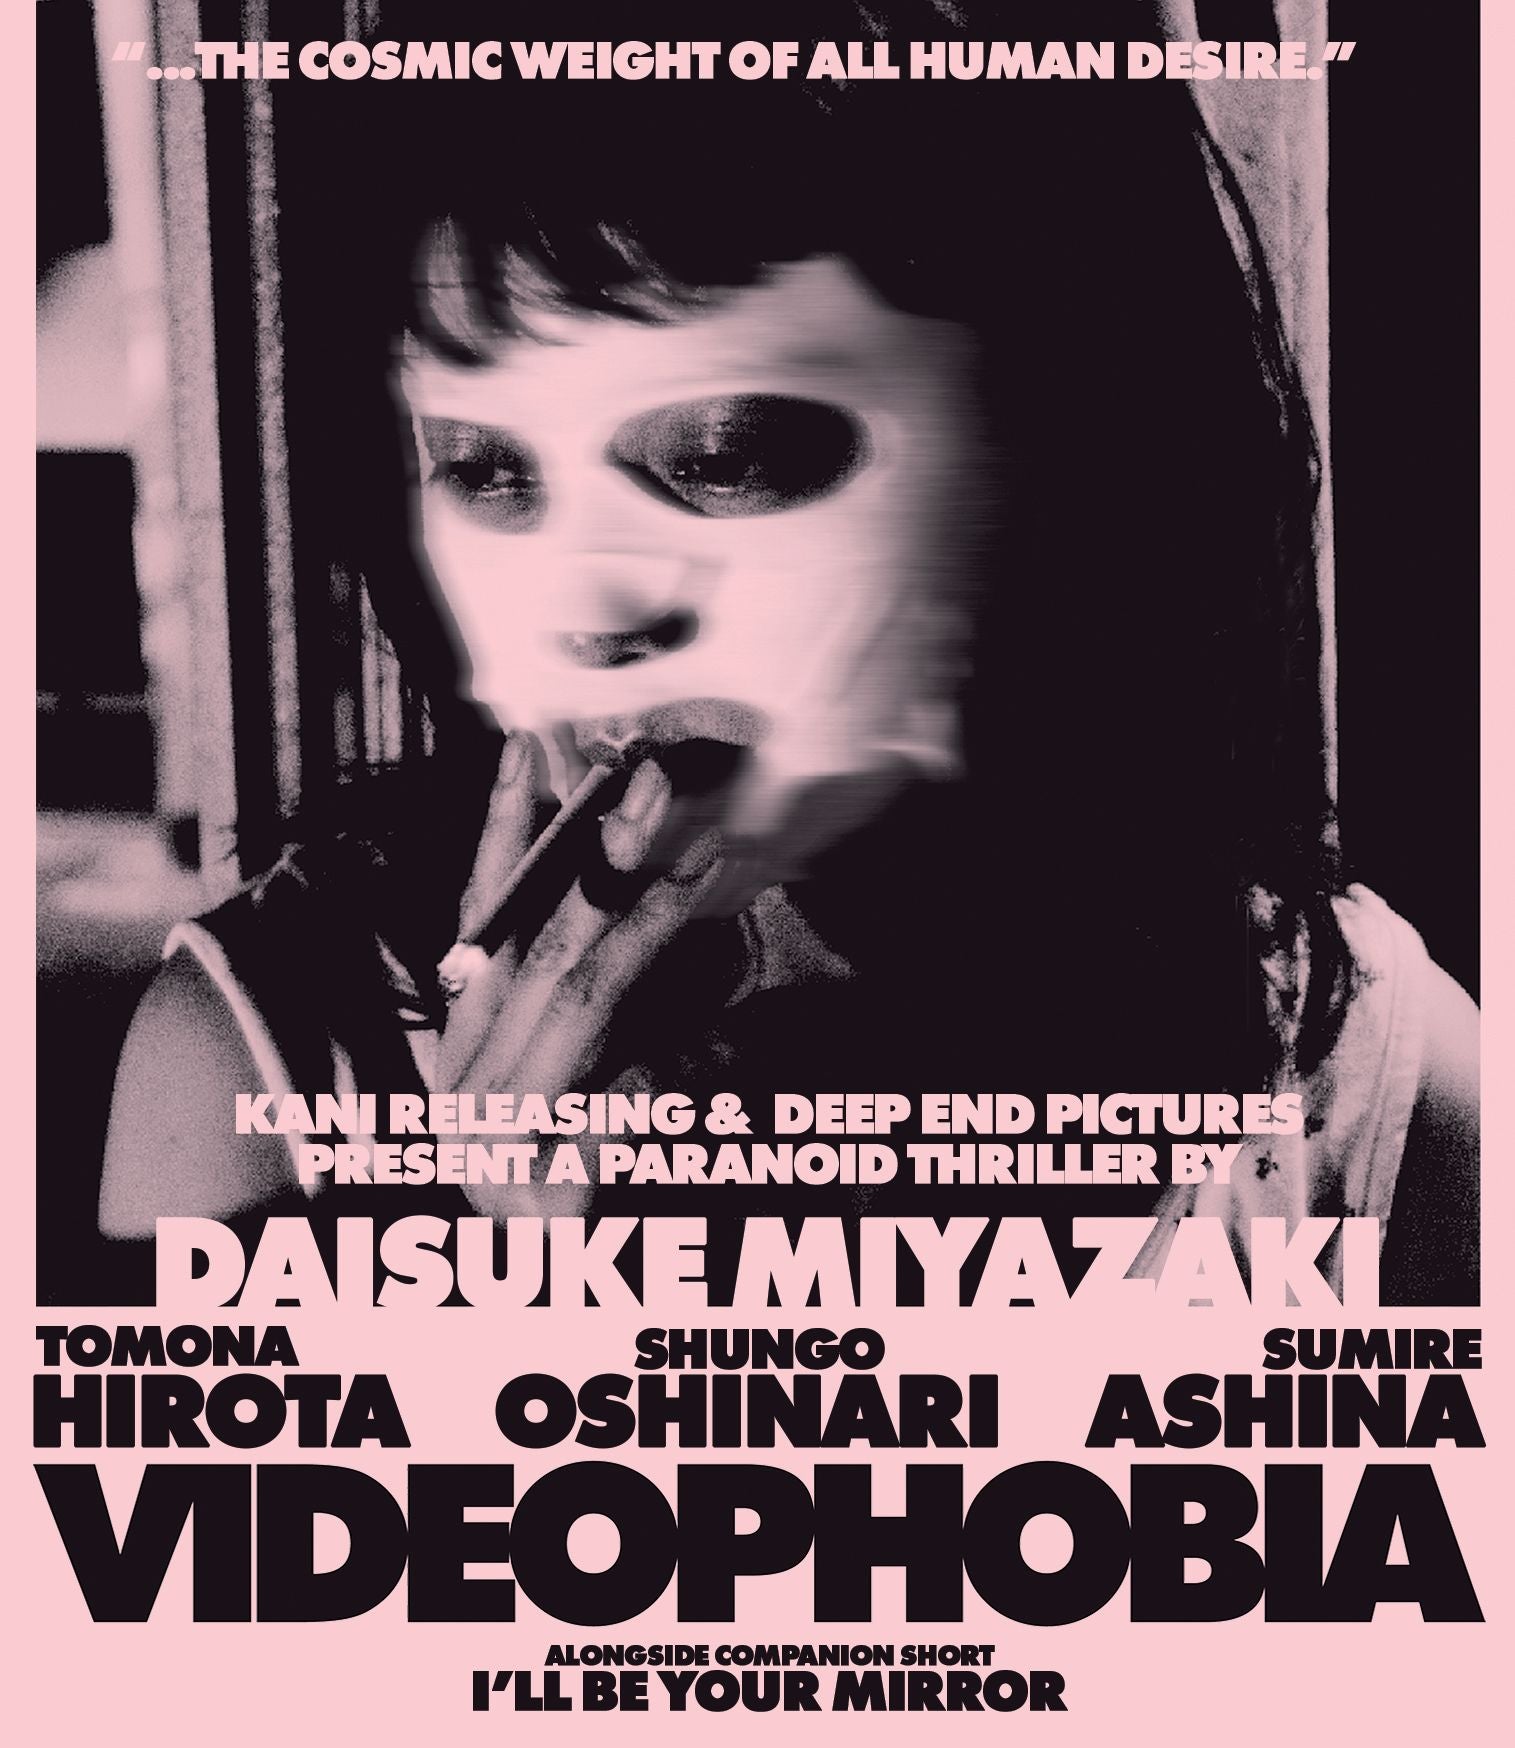 VIDEOPHOBIA (LIMITED EDITION) BLU-RAY